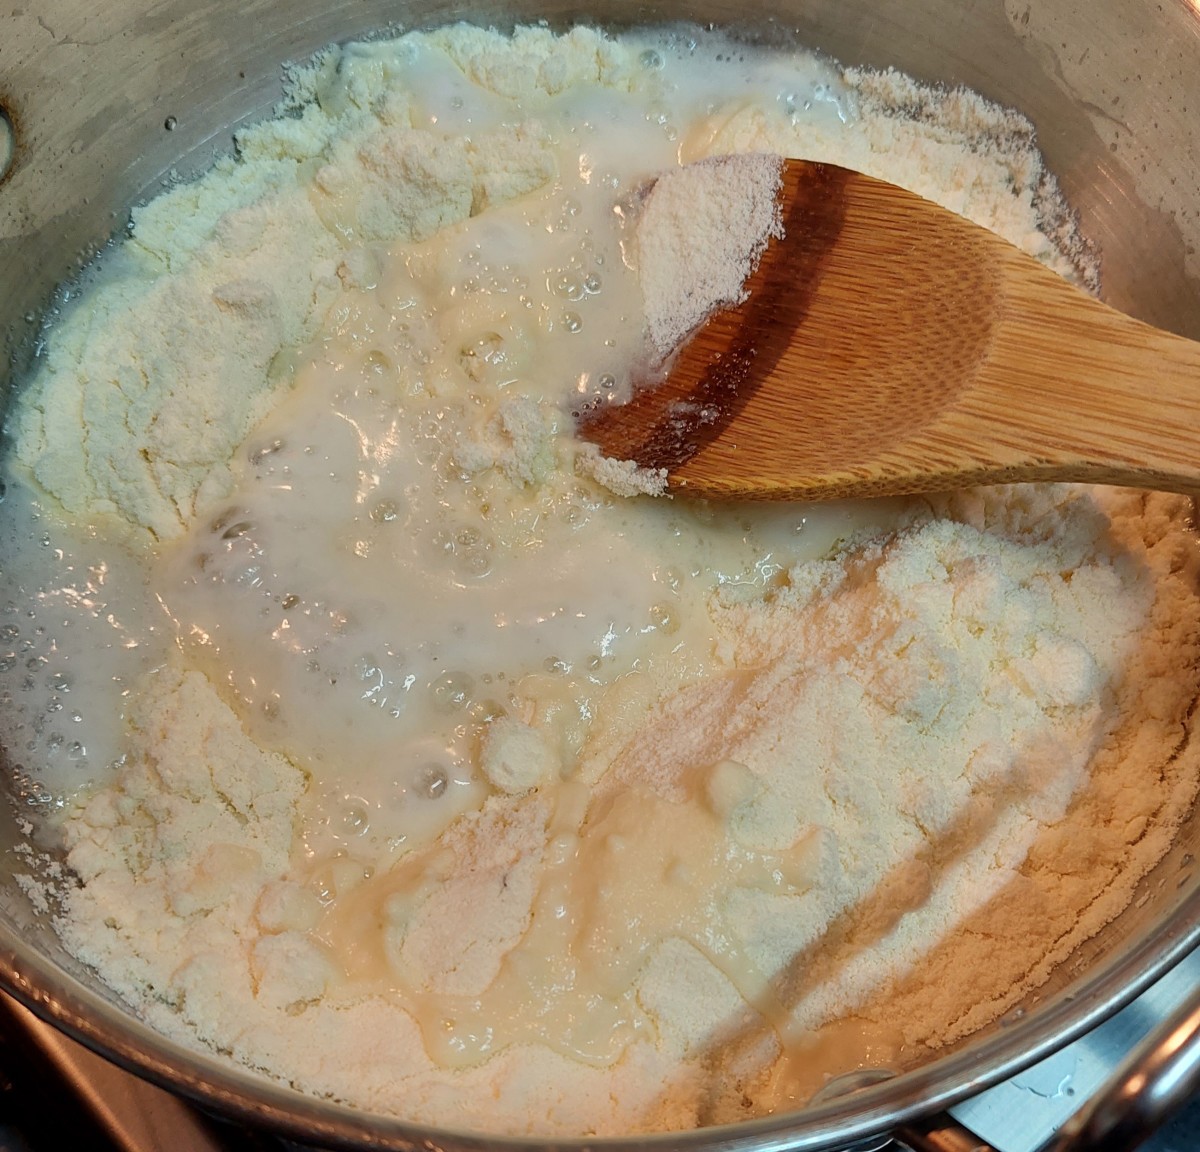 Add 1 1/2 cups of milk powder. Mix until well combined with the sugar solution (no lumps).